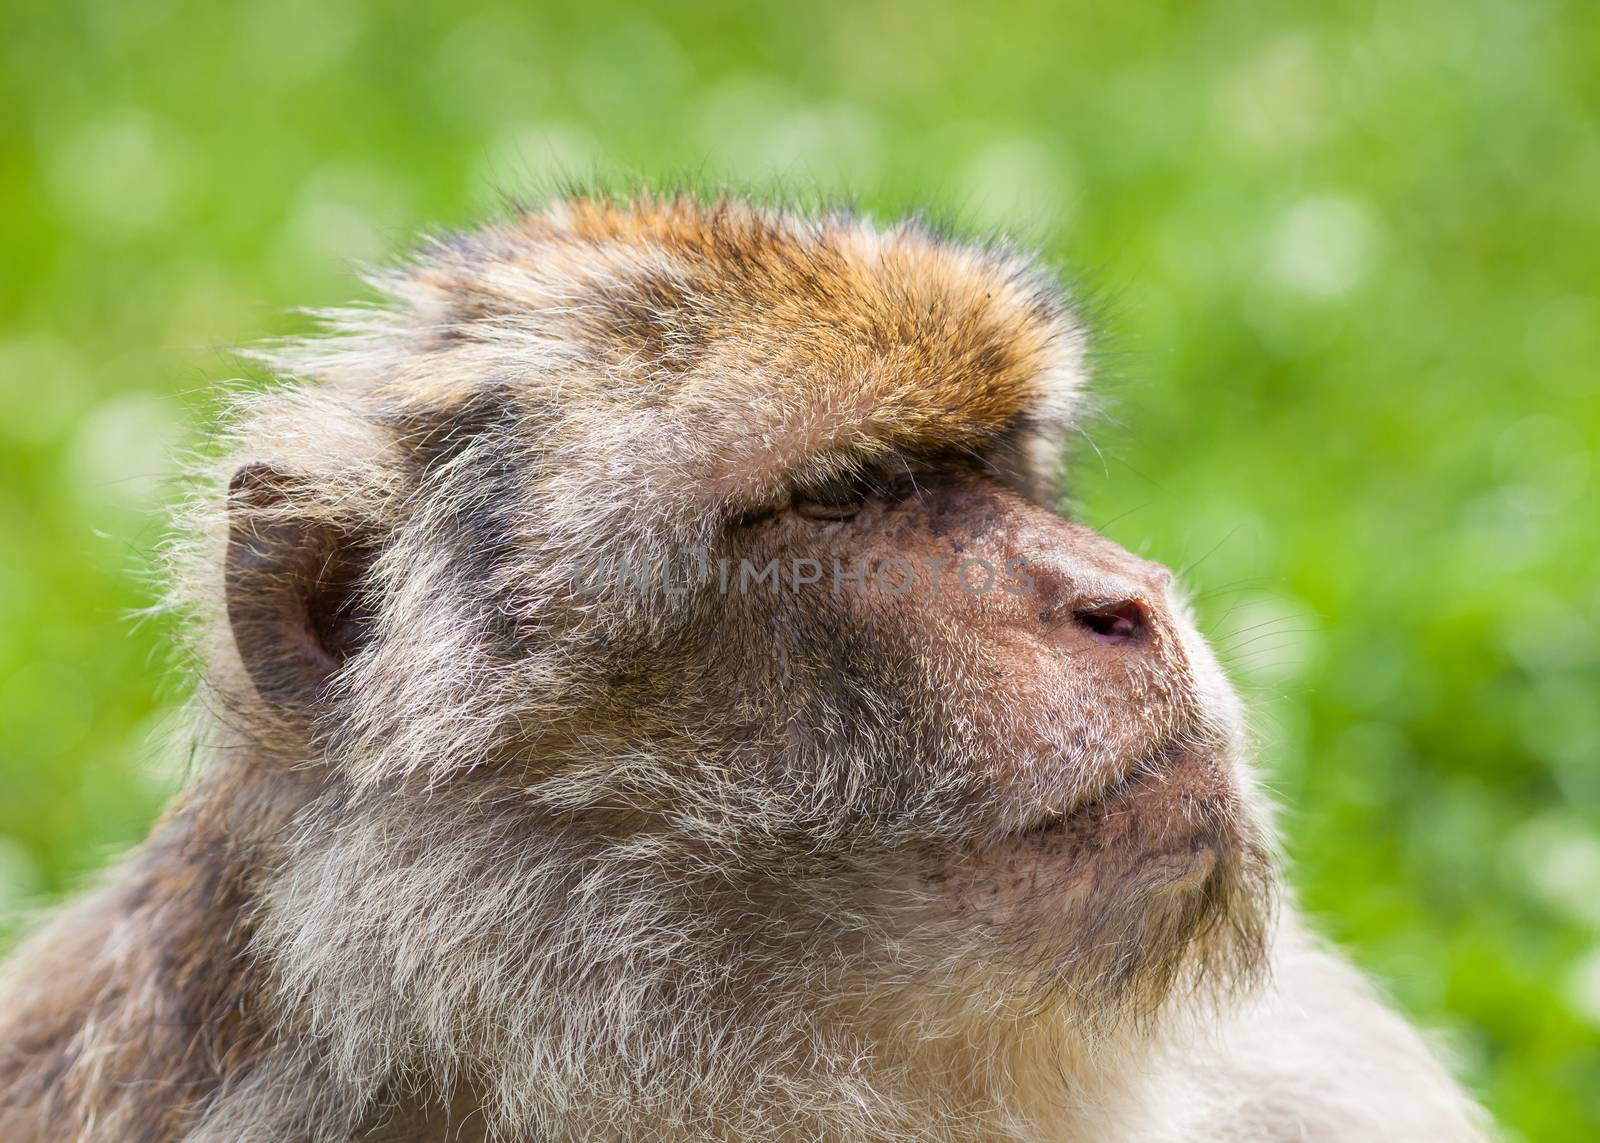 Barbary Macaque Monkey by ATGImages